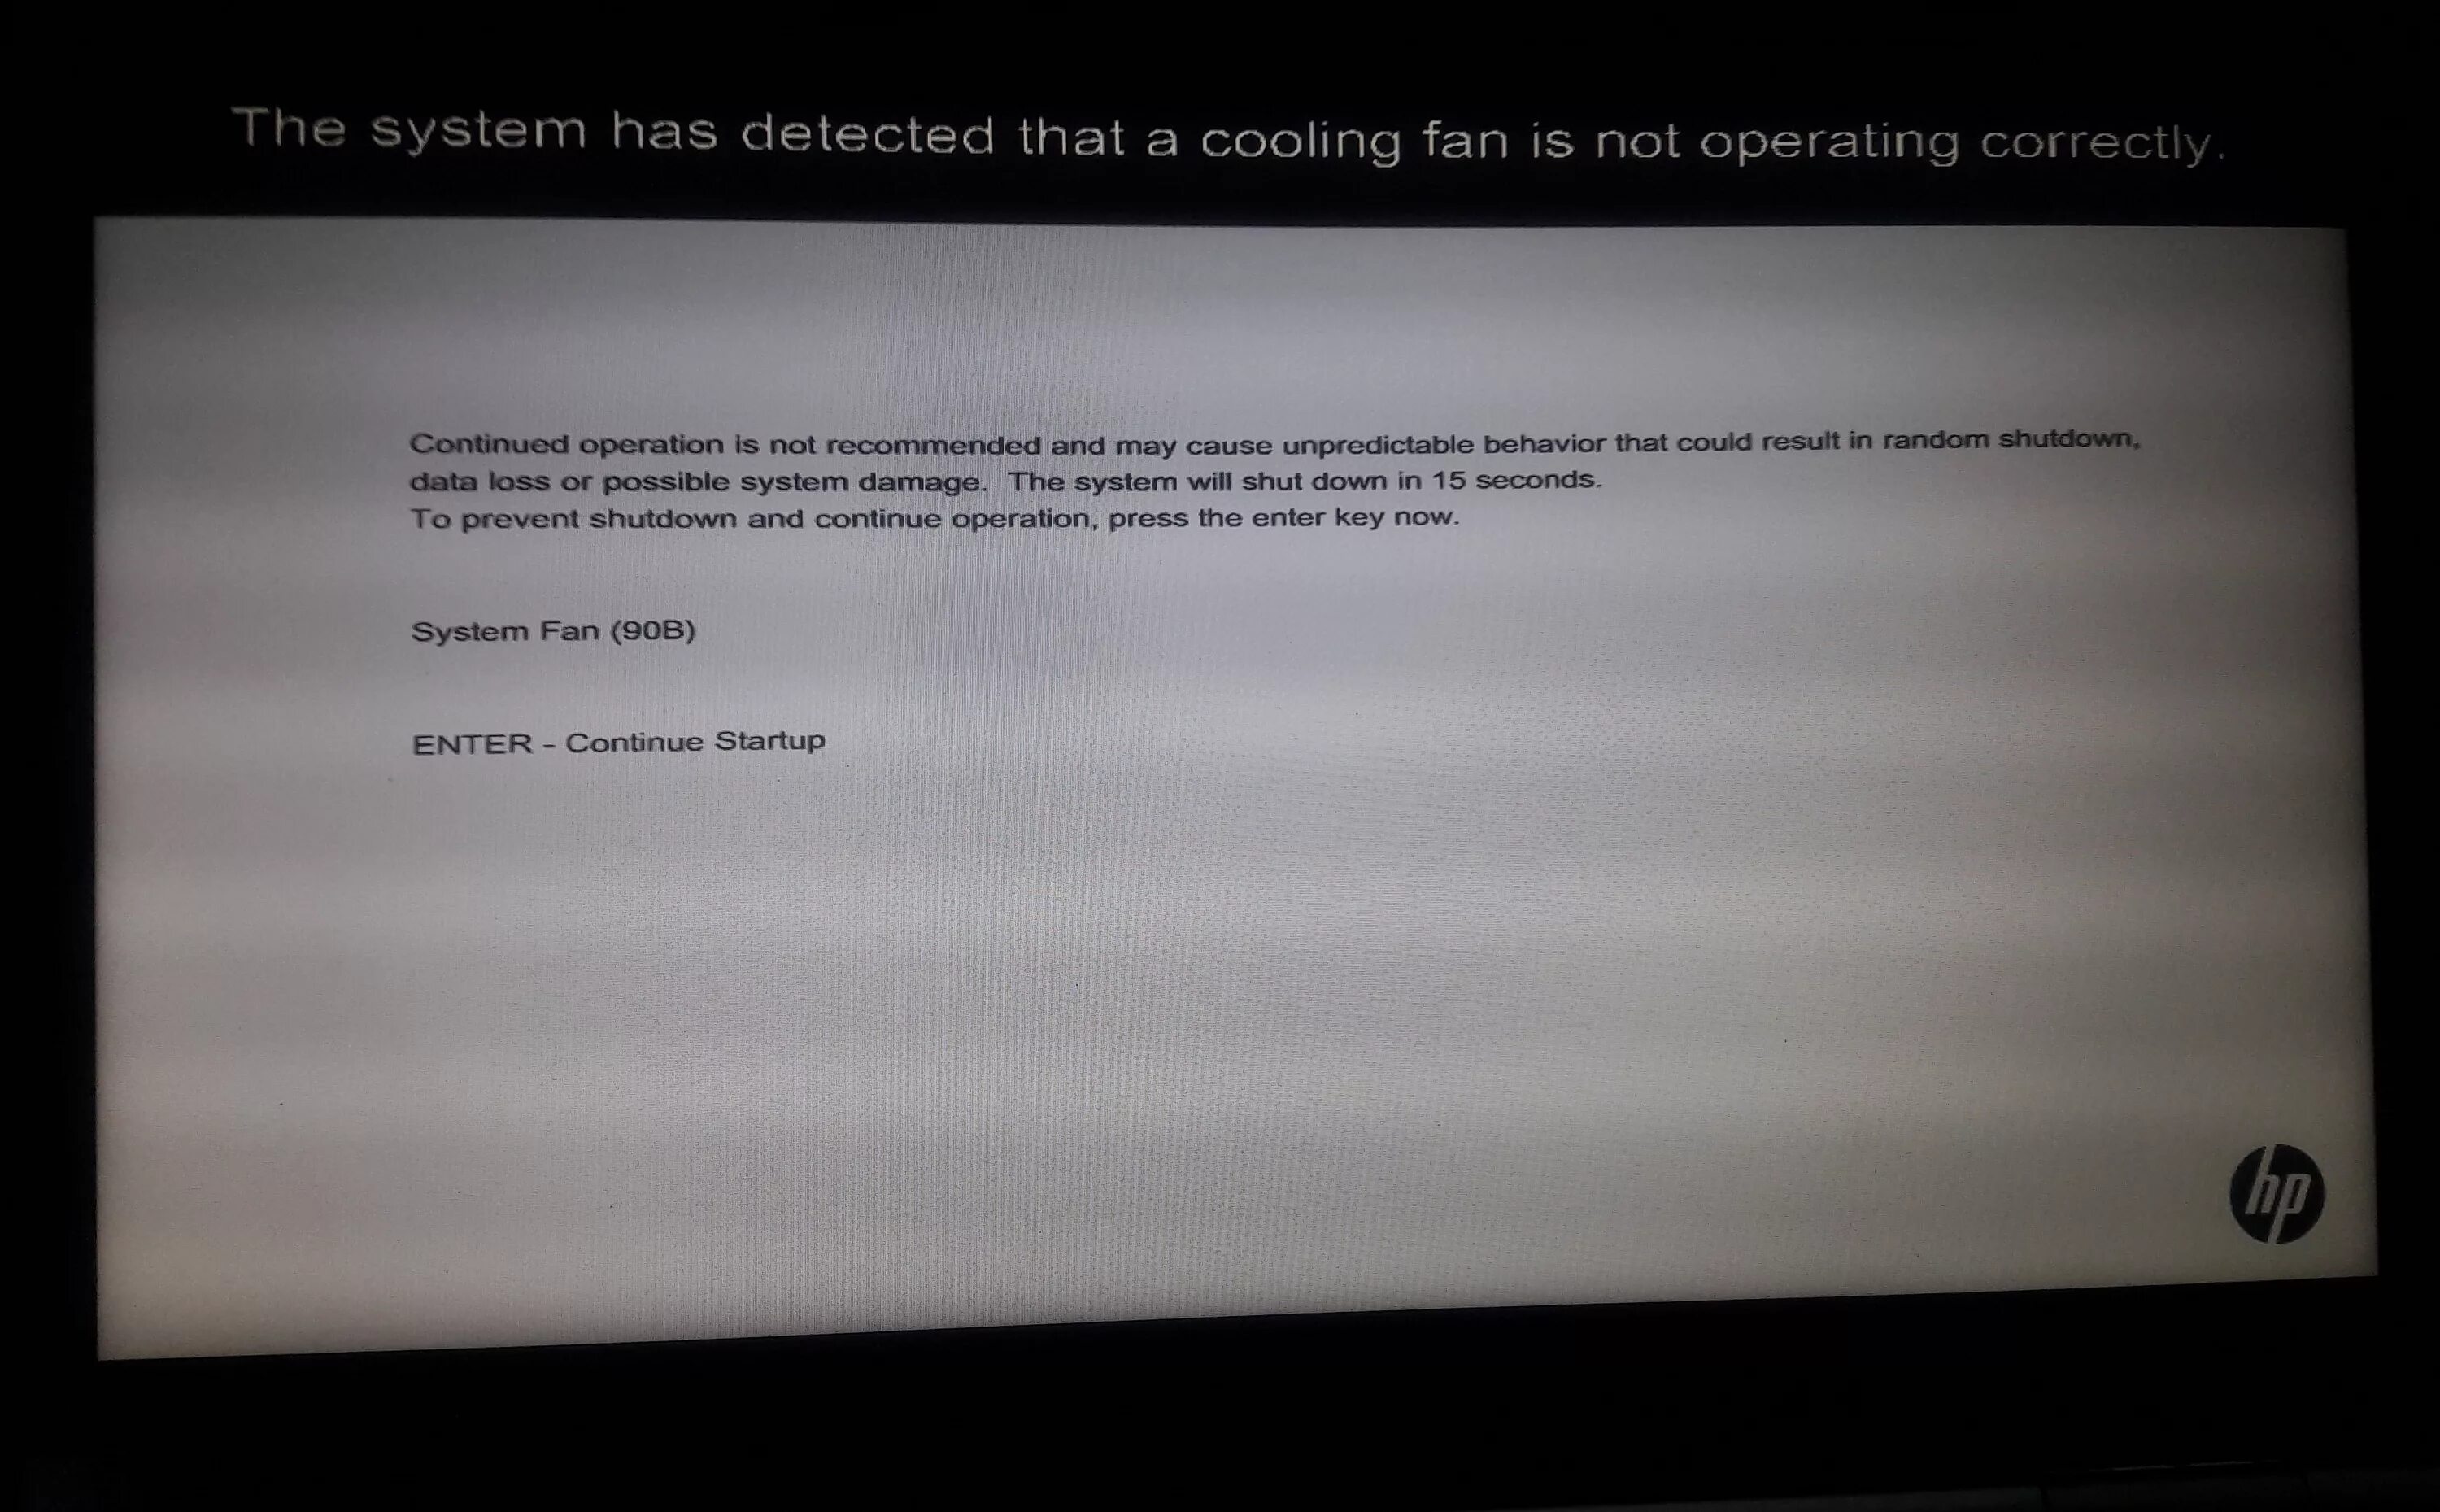 The System has detected that a Cooling Fan is not operating correctly. The system has detected